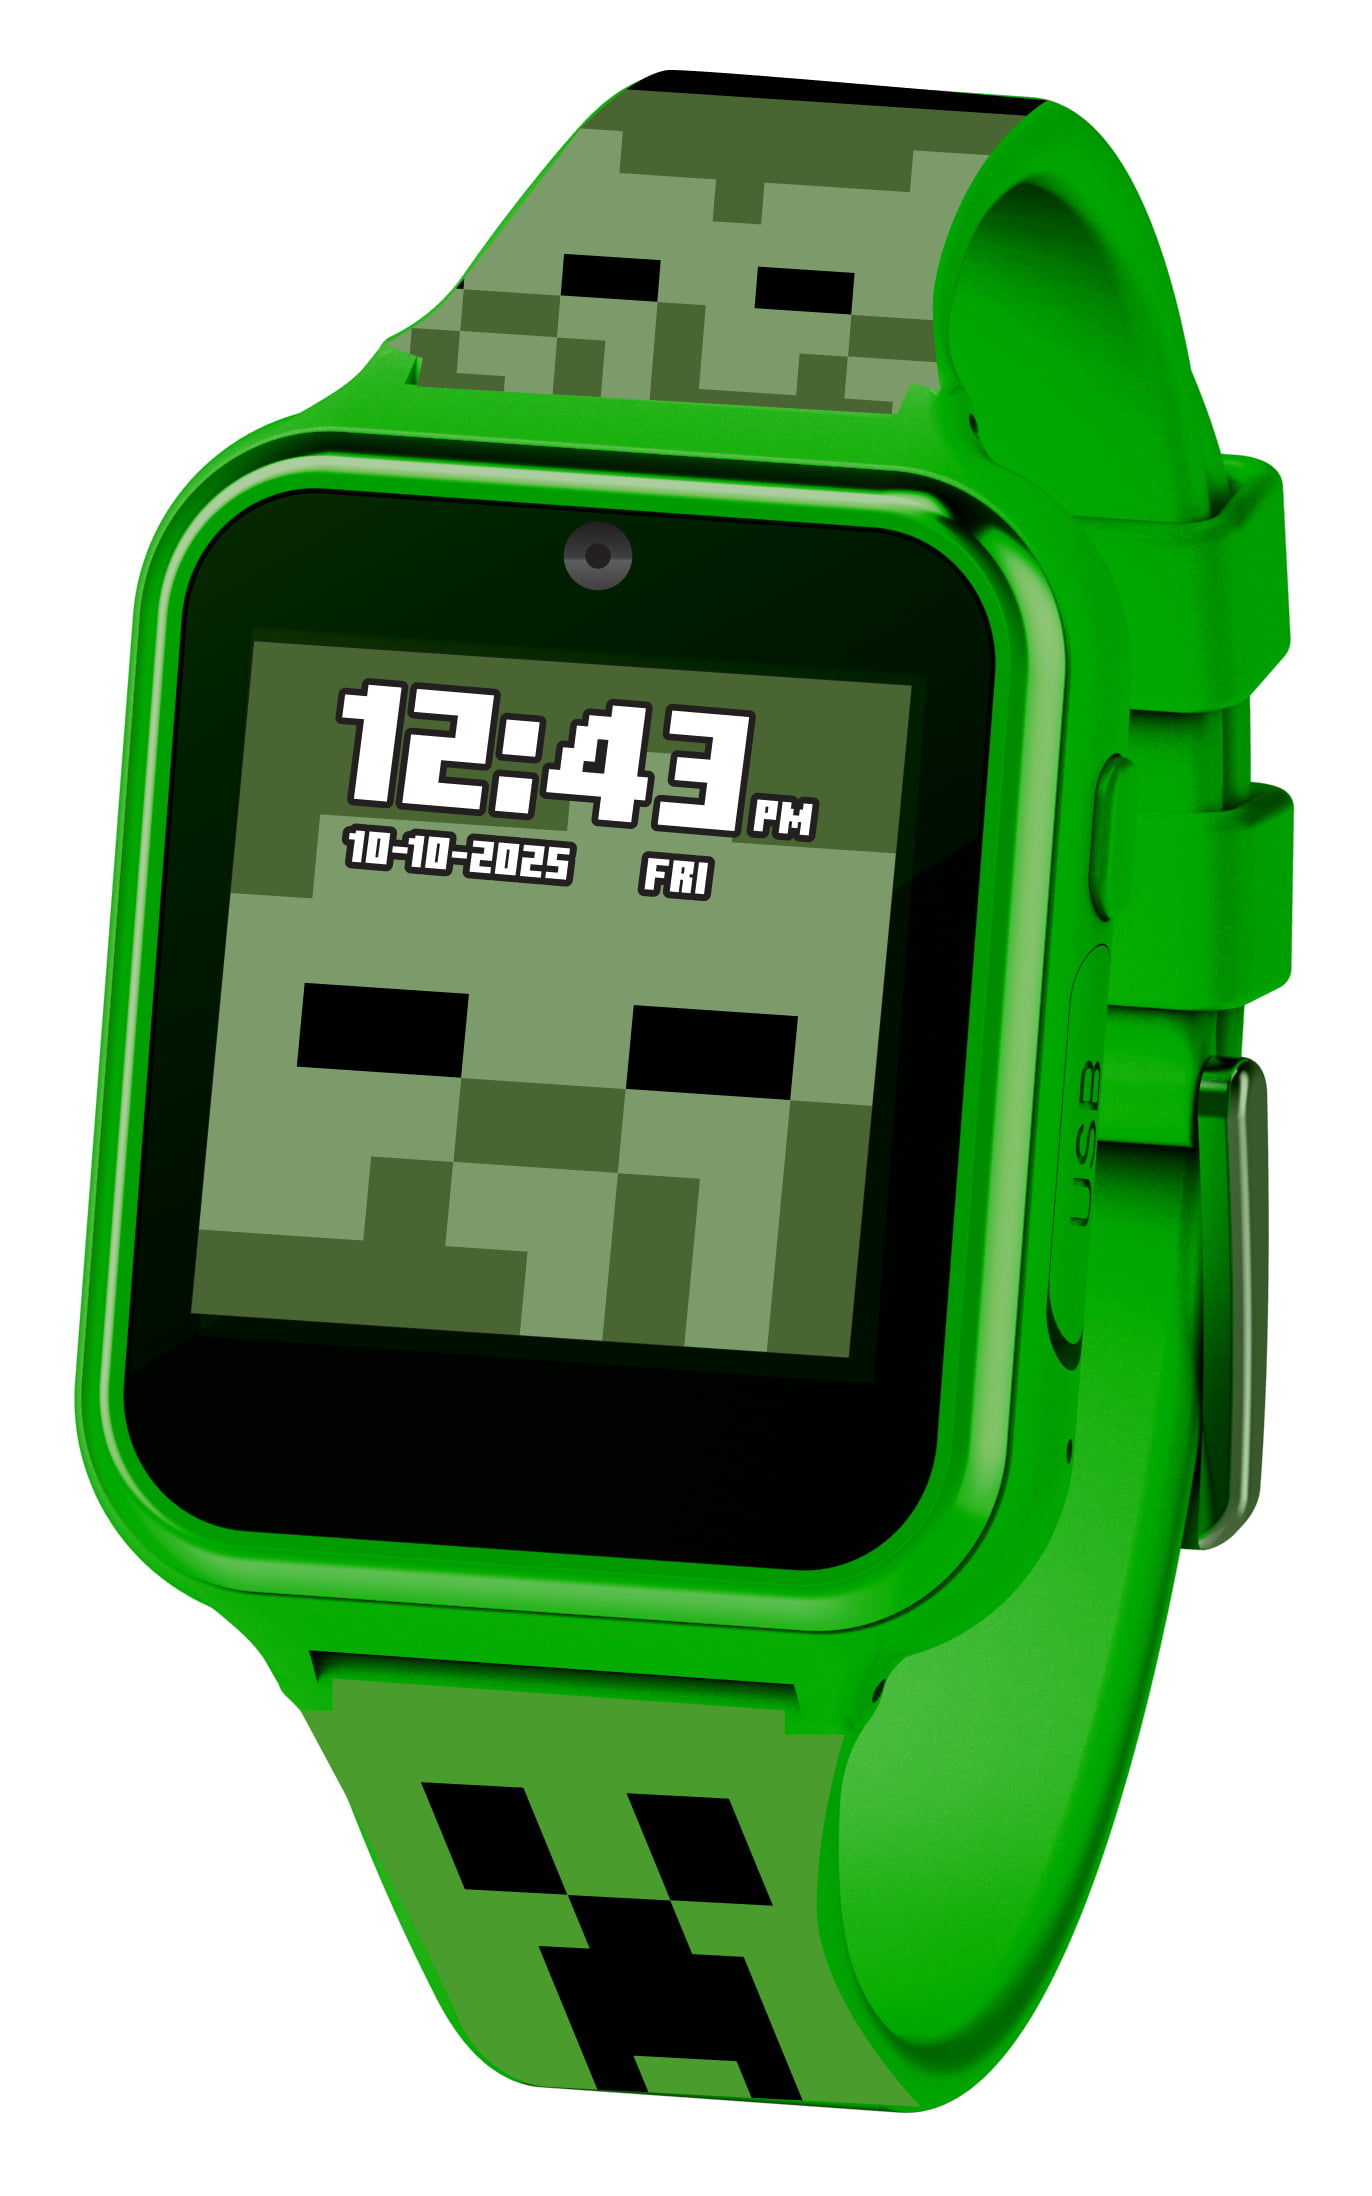 Minecraft iTime Interactive Smartwatch for Kids